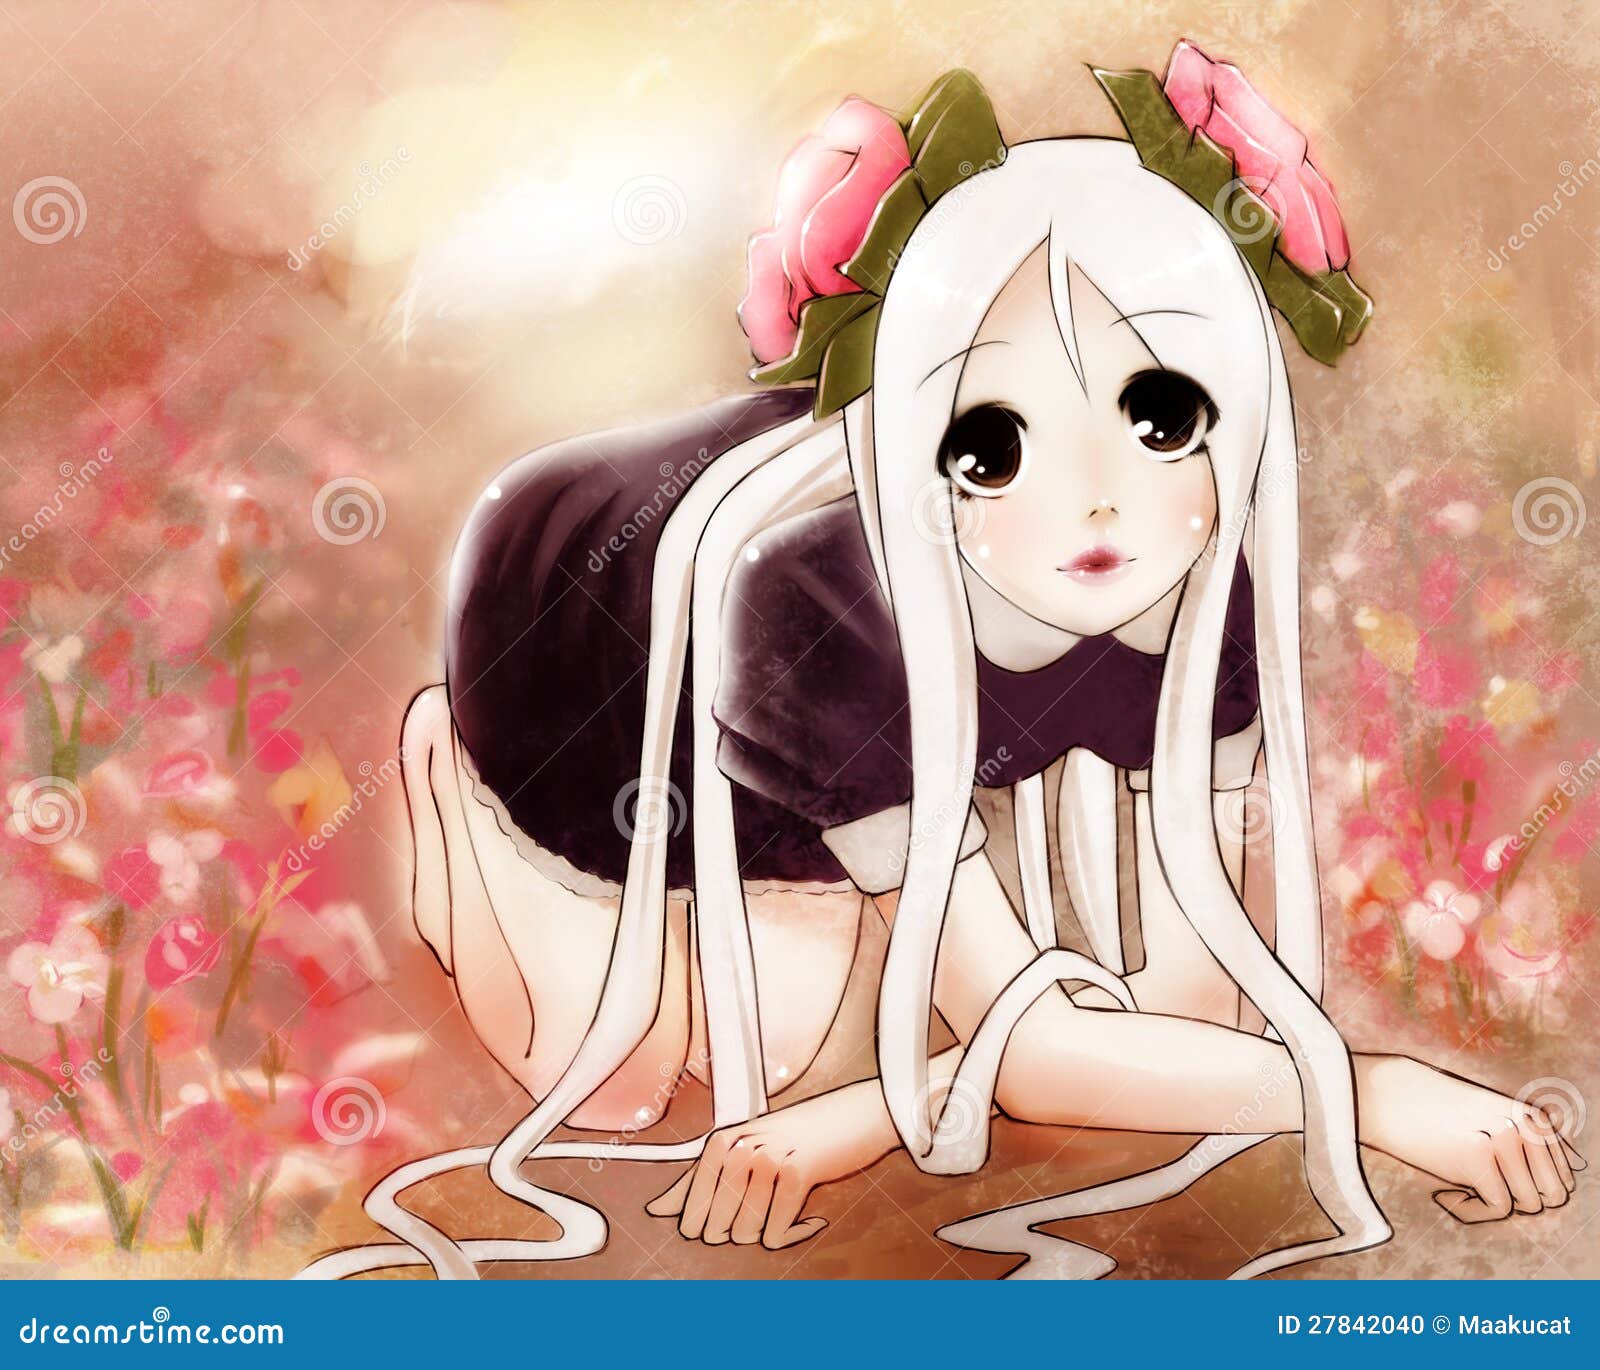 anime girl with flowers in her hair